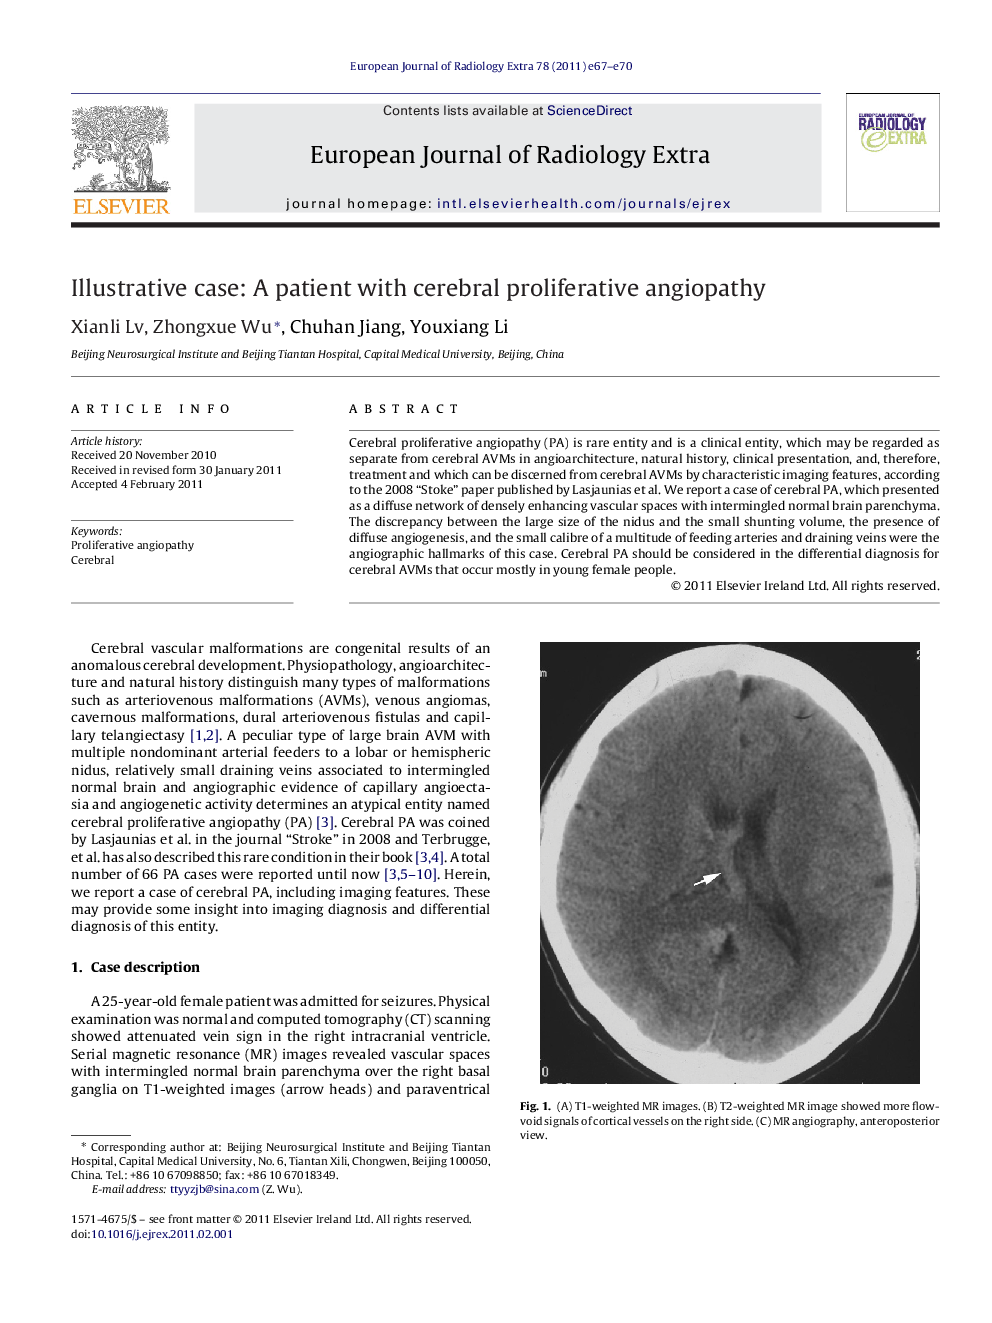 Illustrative case: A patient with cerebral proliferative angiopathy